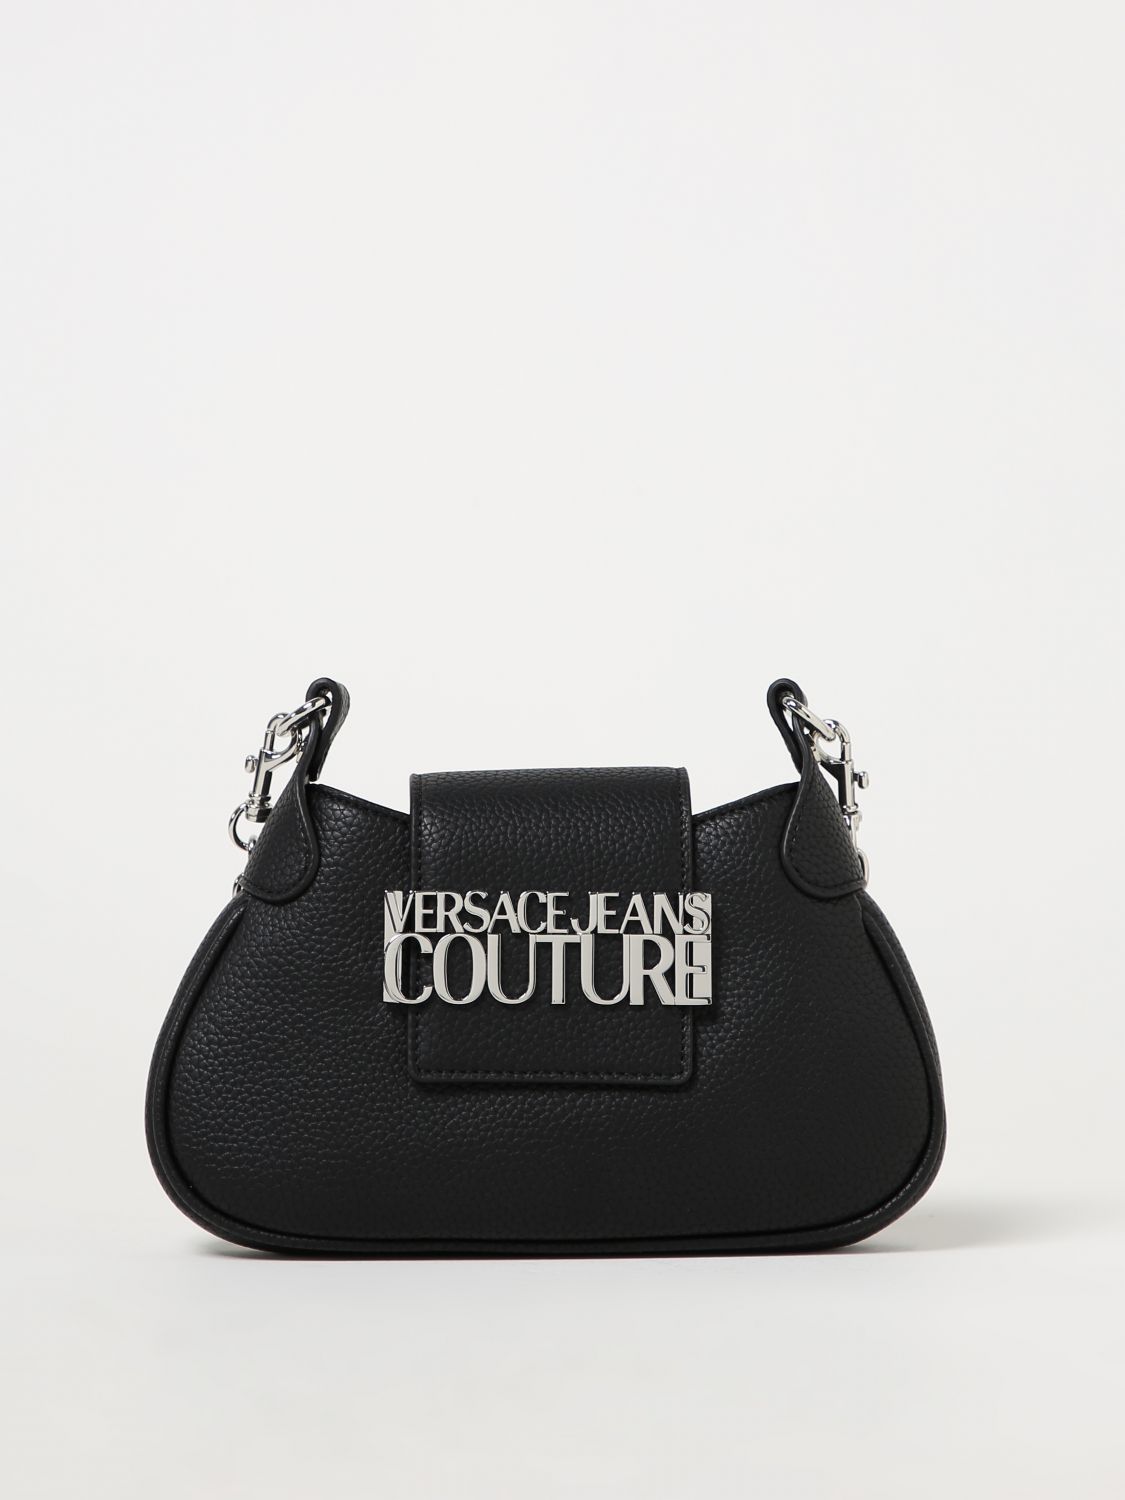 Versace Jeans Couture Bag in Grained Synthetic Leather